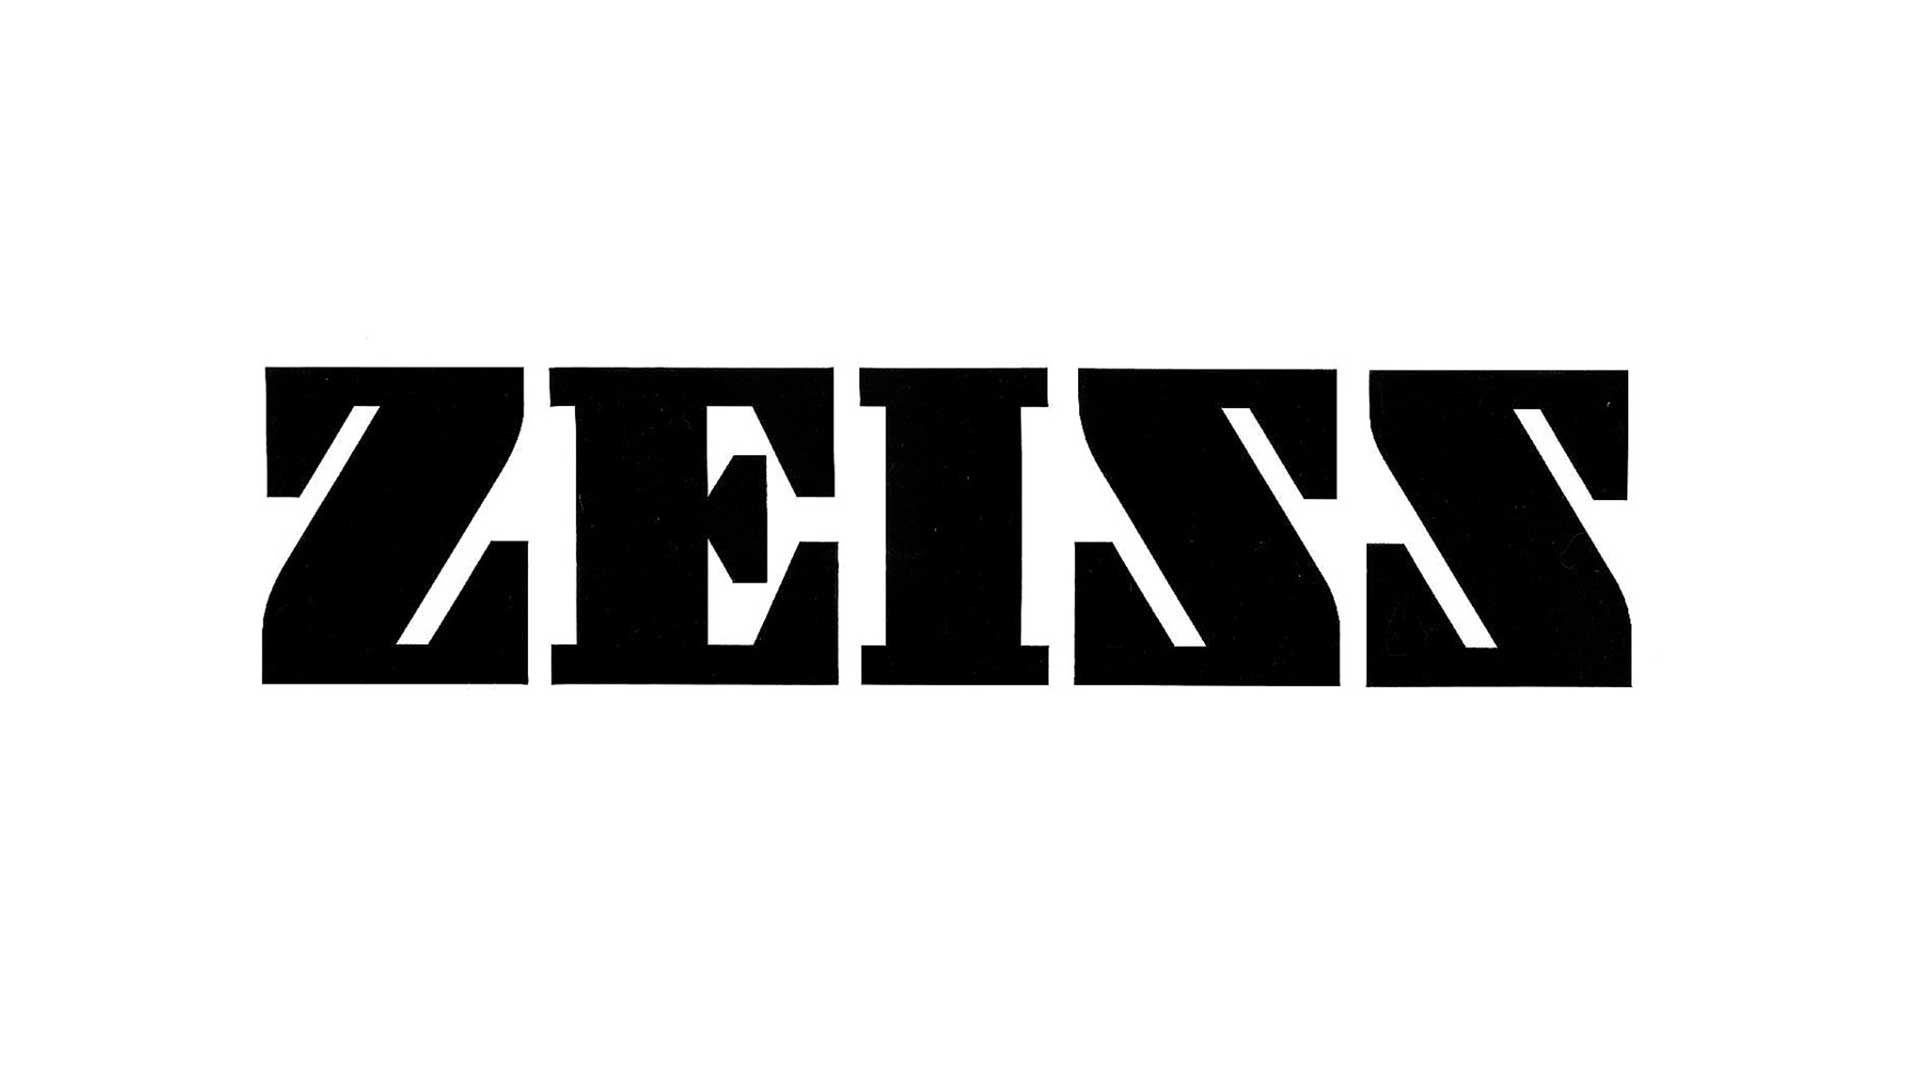 ZEISS lettering with angular letters.